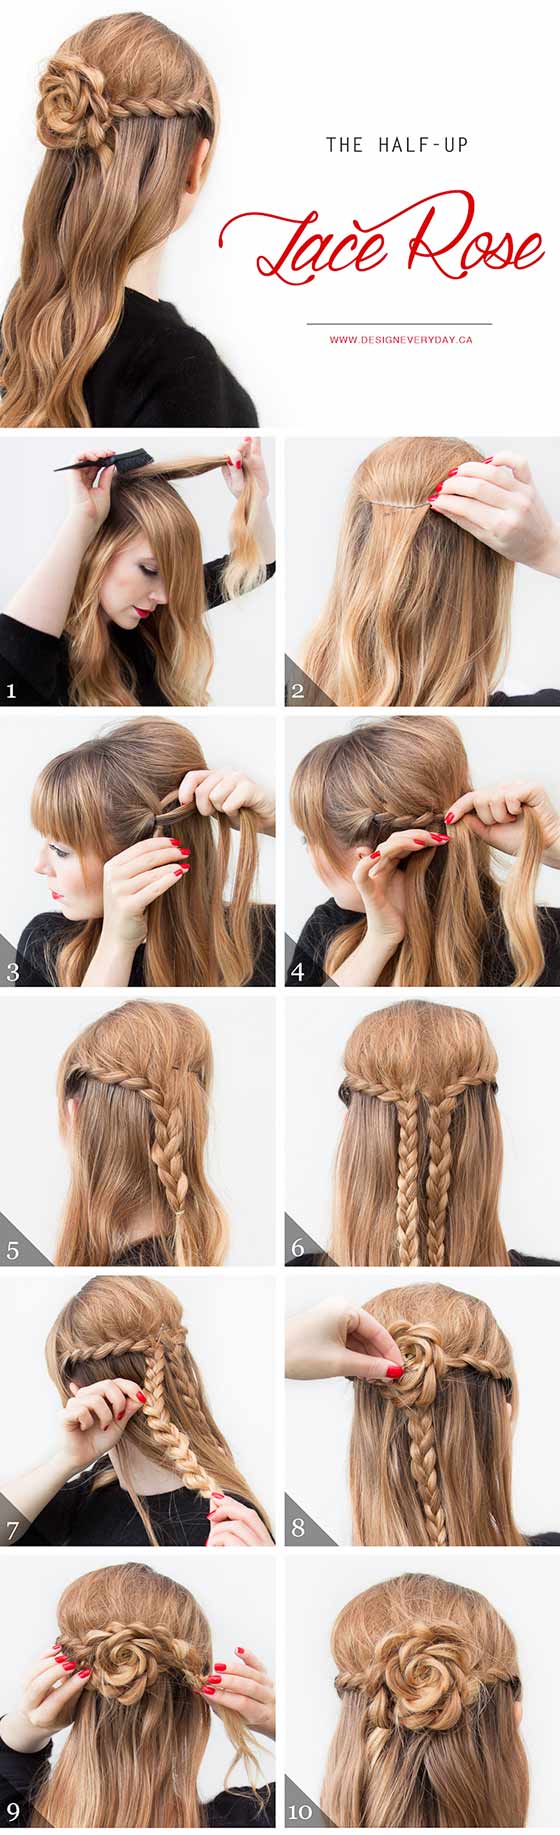 40 braided hairstyles for long hair